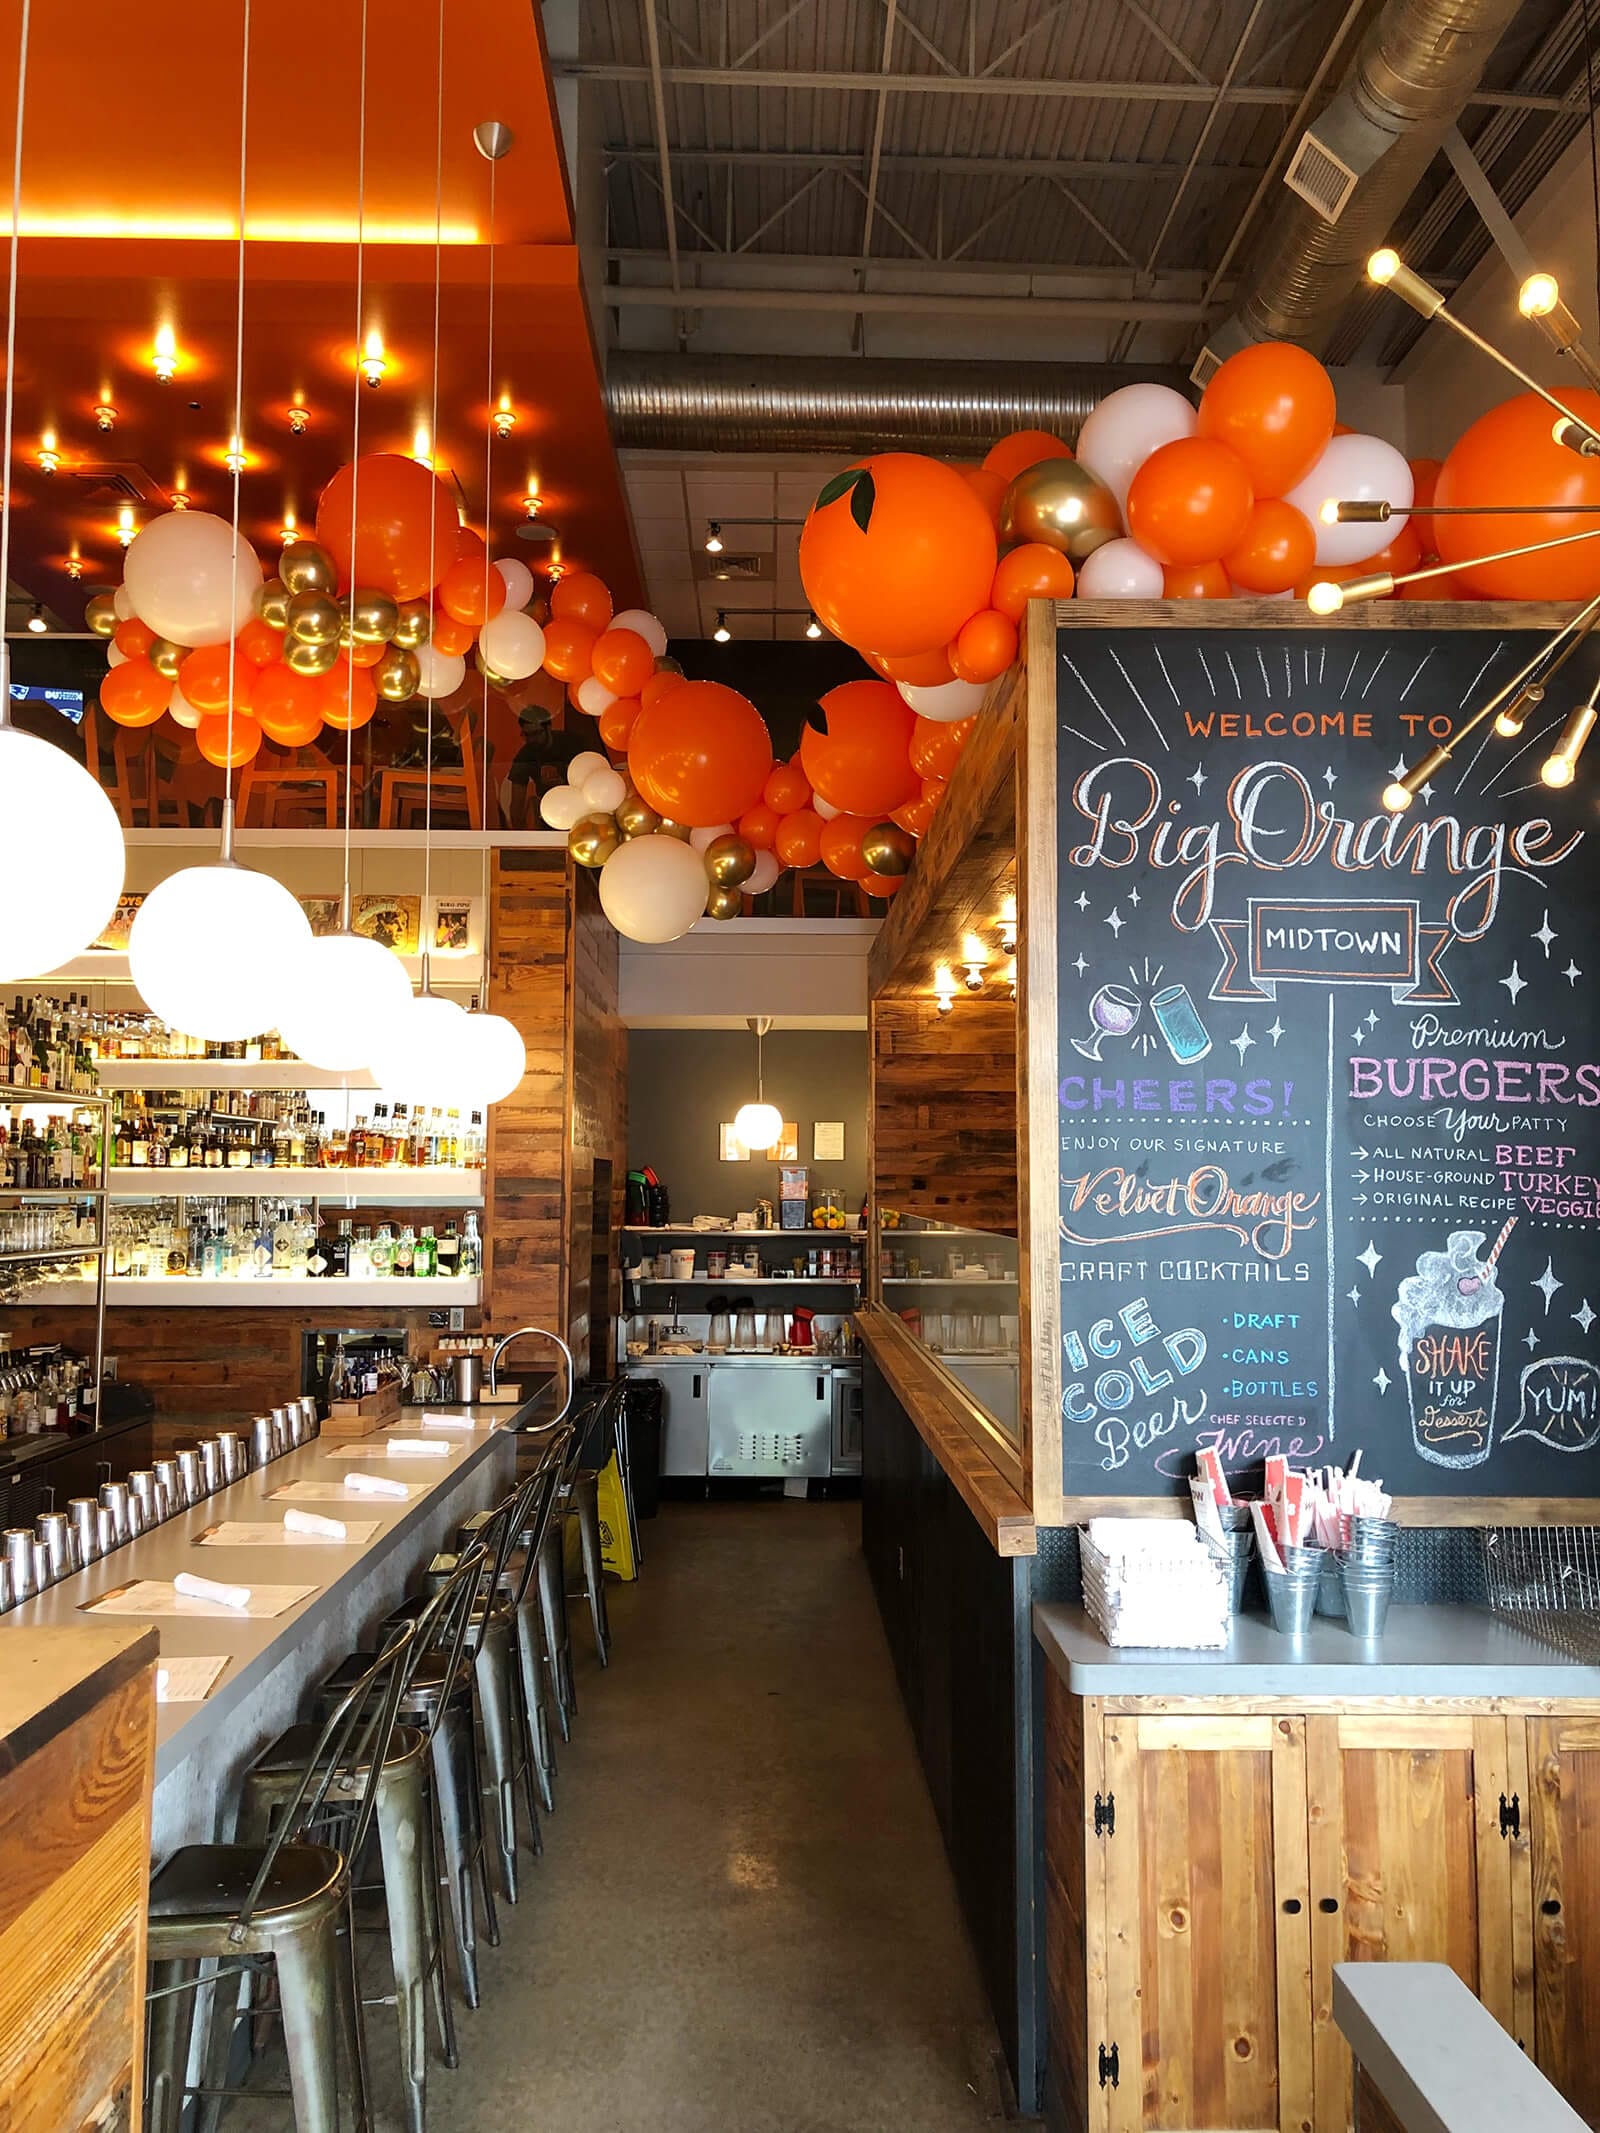 Big Orange restaurant in midtown Little Rock, Arkansas, celebrated their anniversary with a ceiling balloon display.